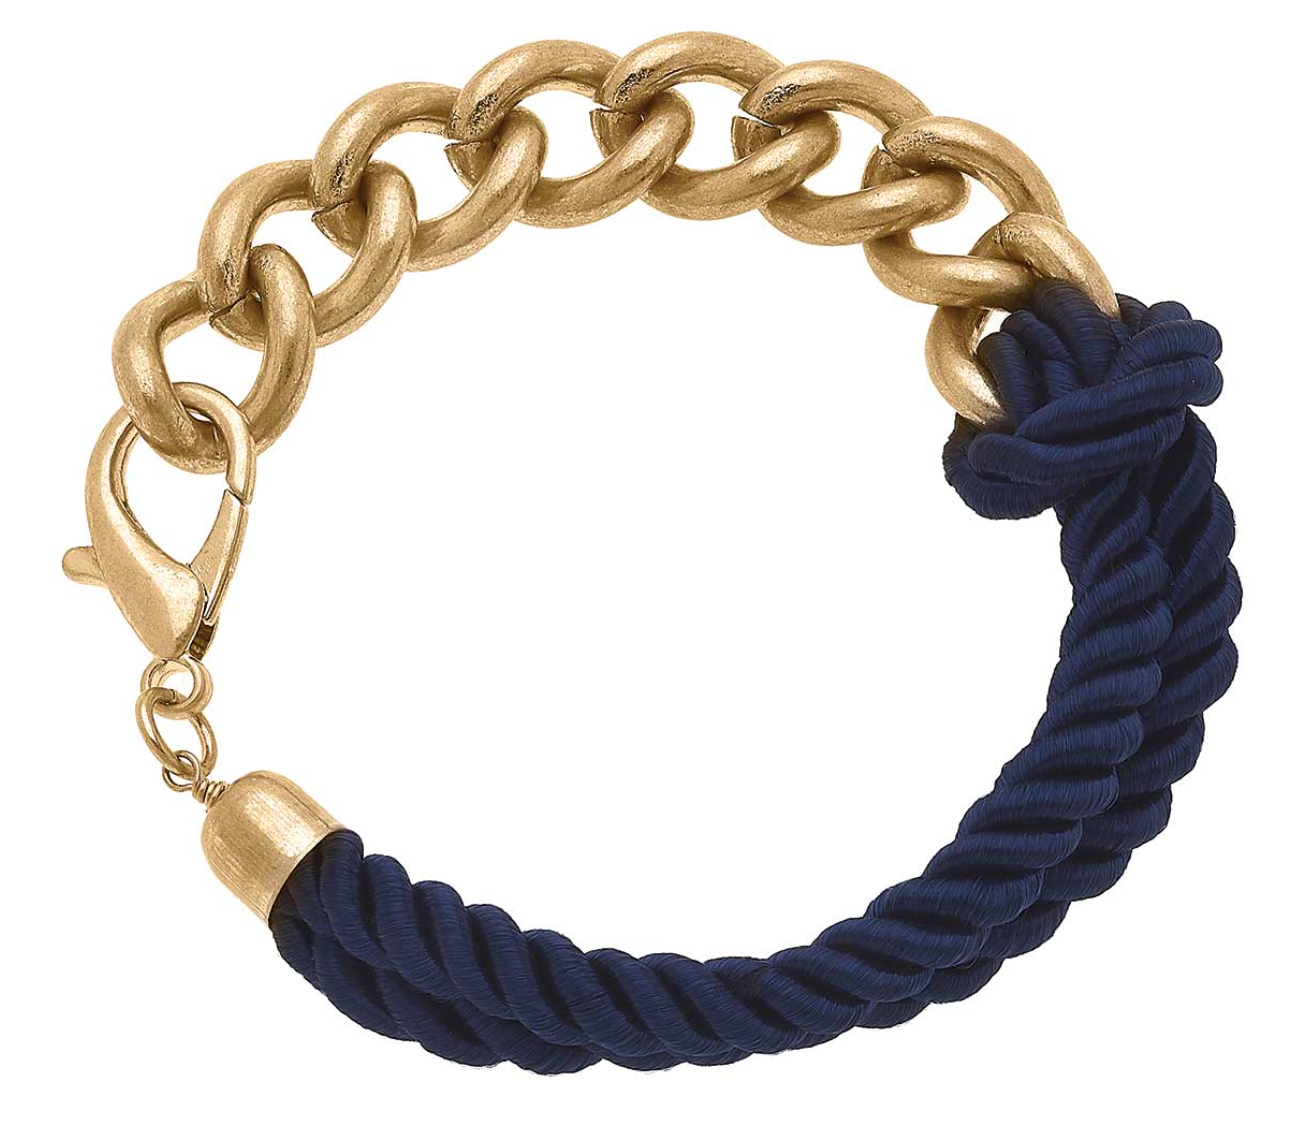 Eliza Knotted Cord & Chain Bracelet